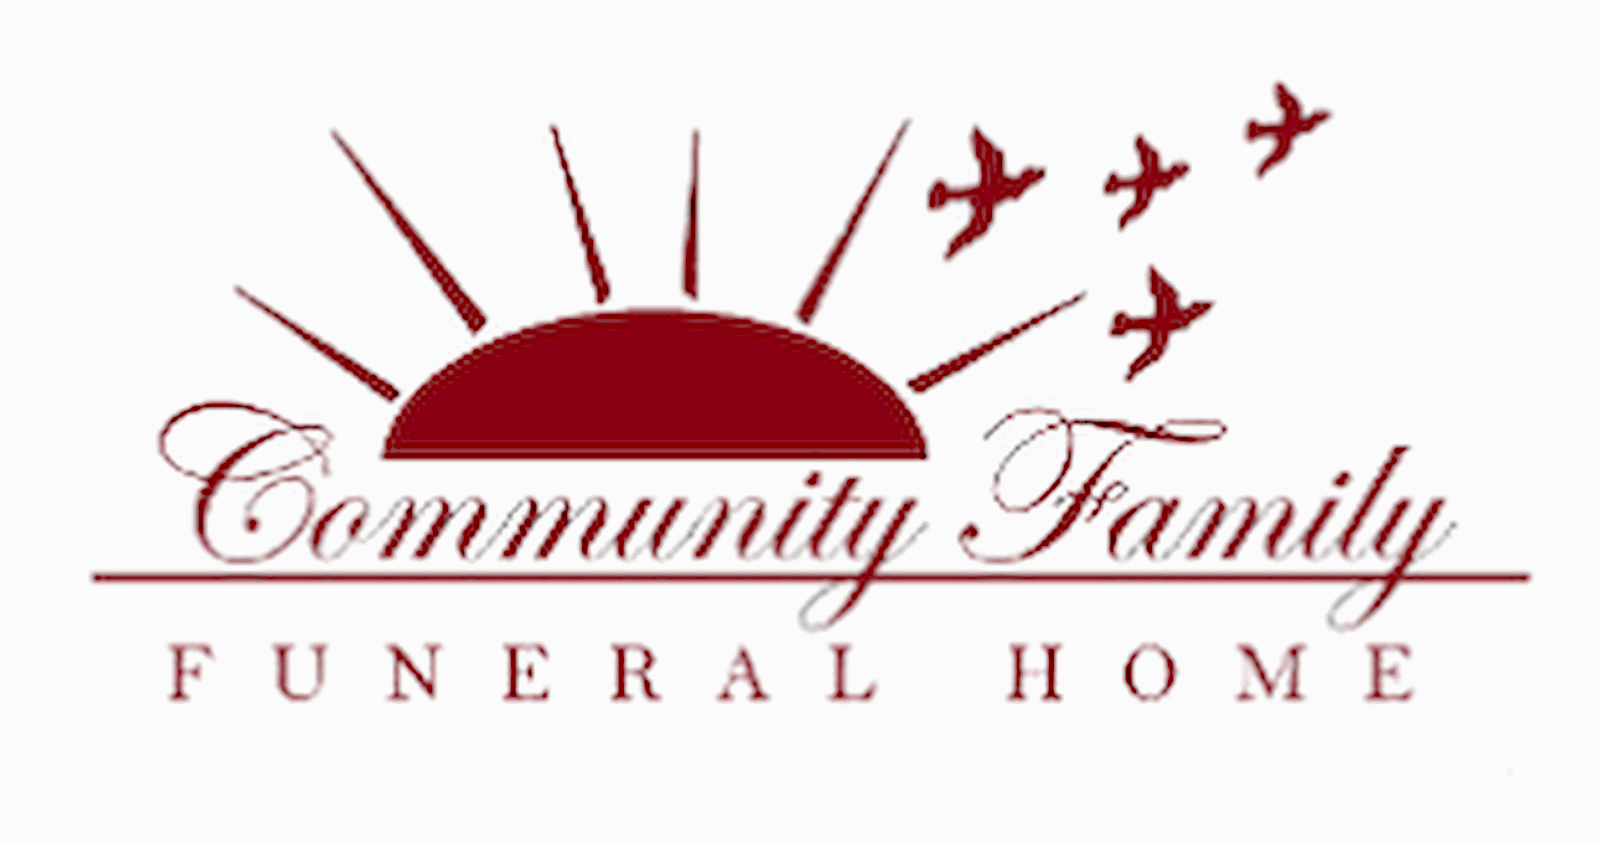 Community Family Funeral Home